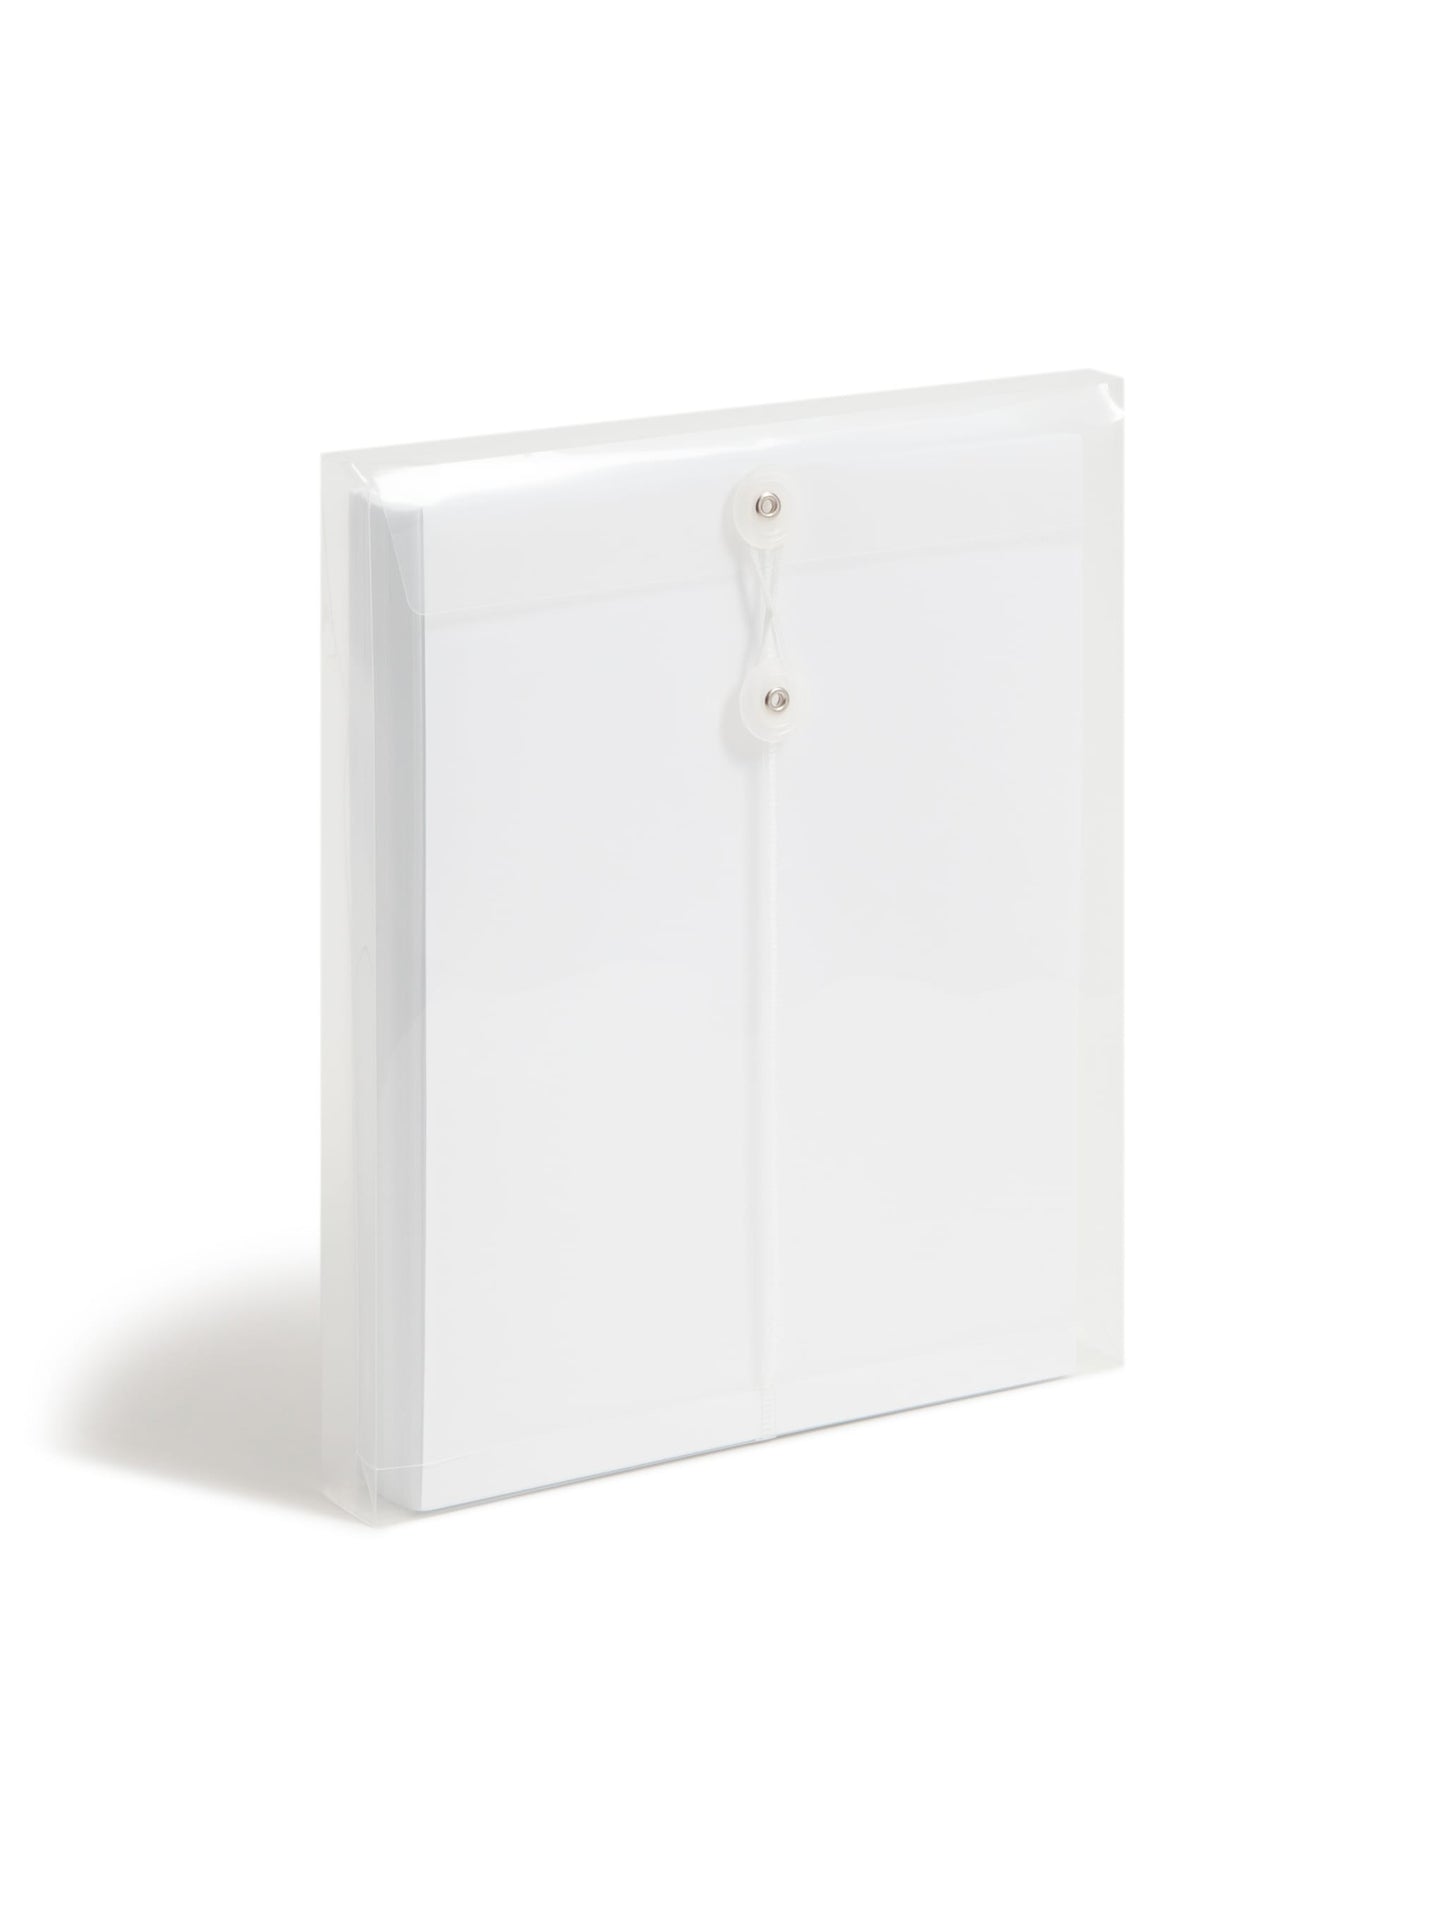 Top Load Poly Envelopes with String Tie Closure, 1-1/4 Inch Expansion, Clear Color, Letter Size, Set of 1, 086486895408